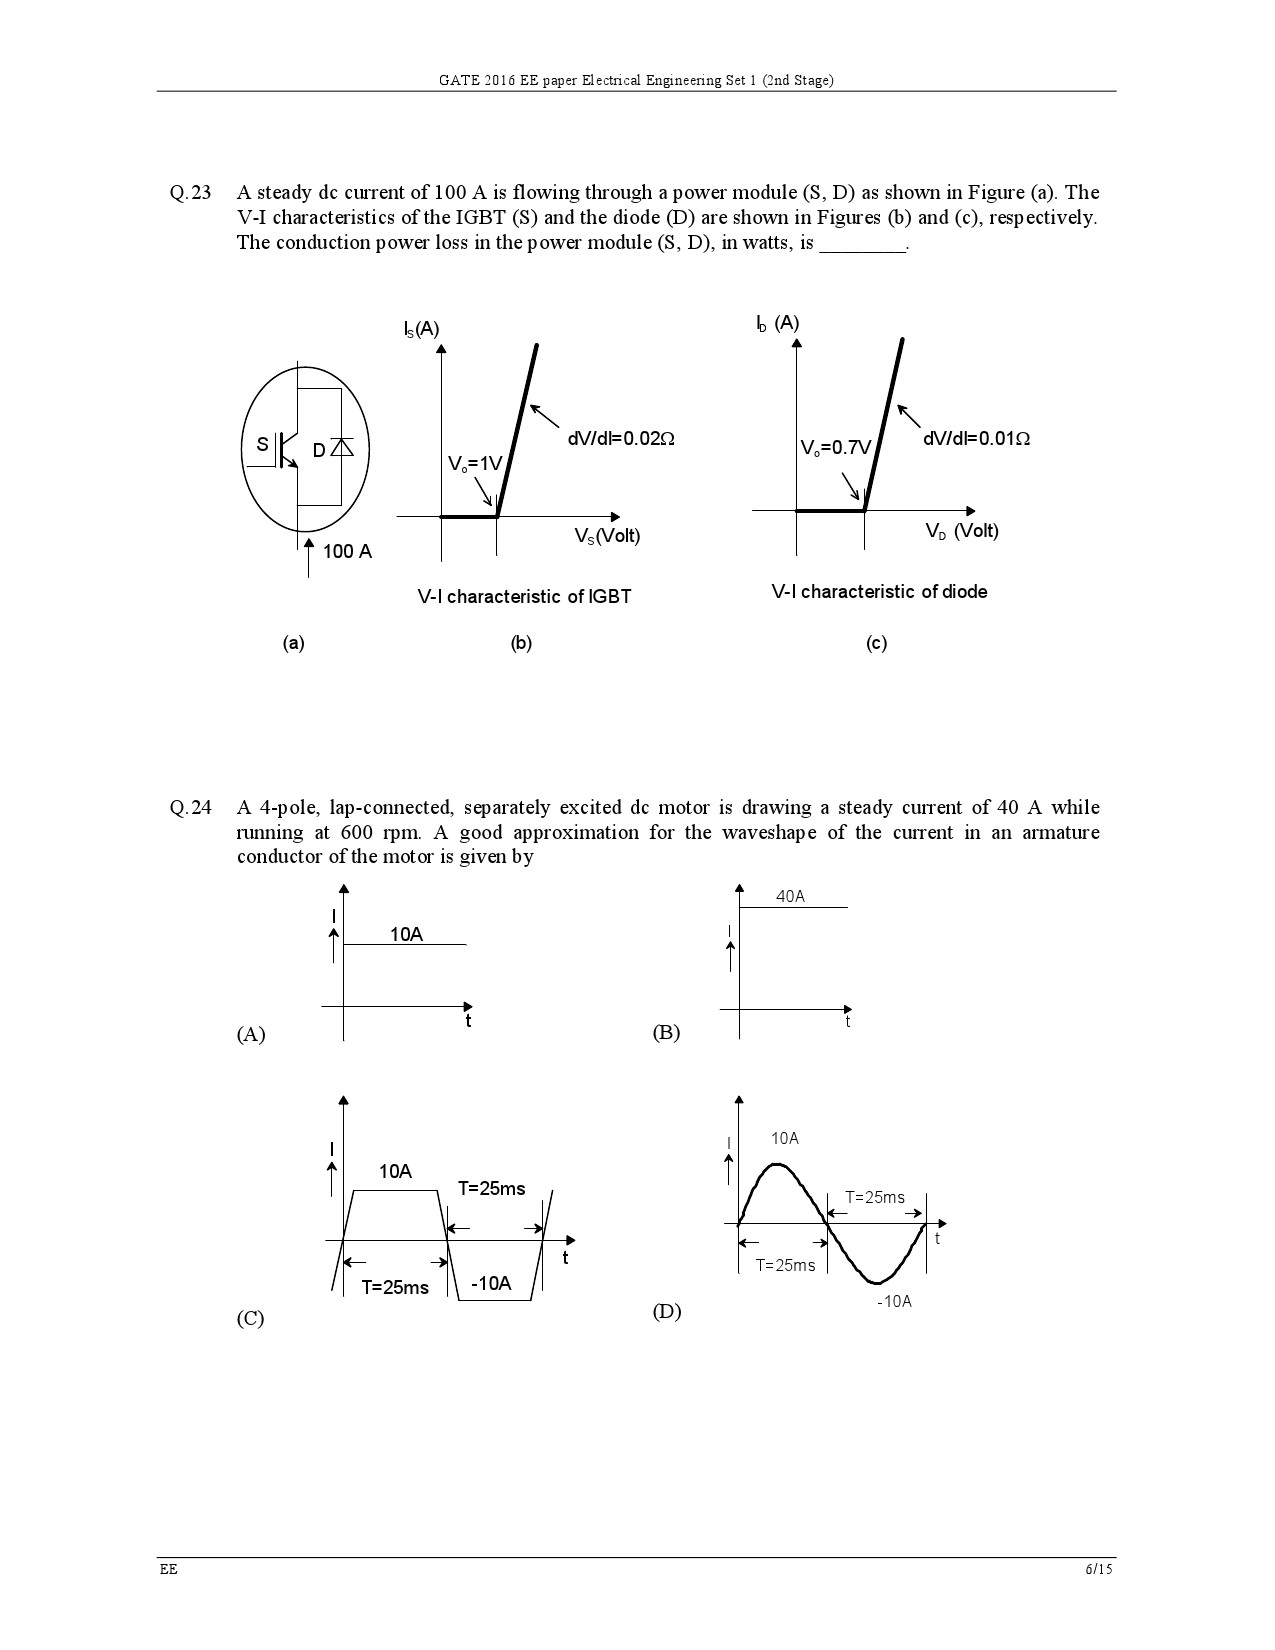 GATE Exam Question Paper 2016 Electrical Engineering Set 1 9